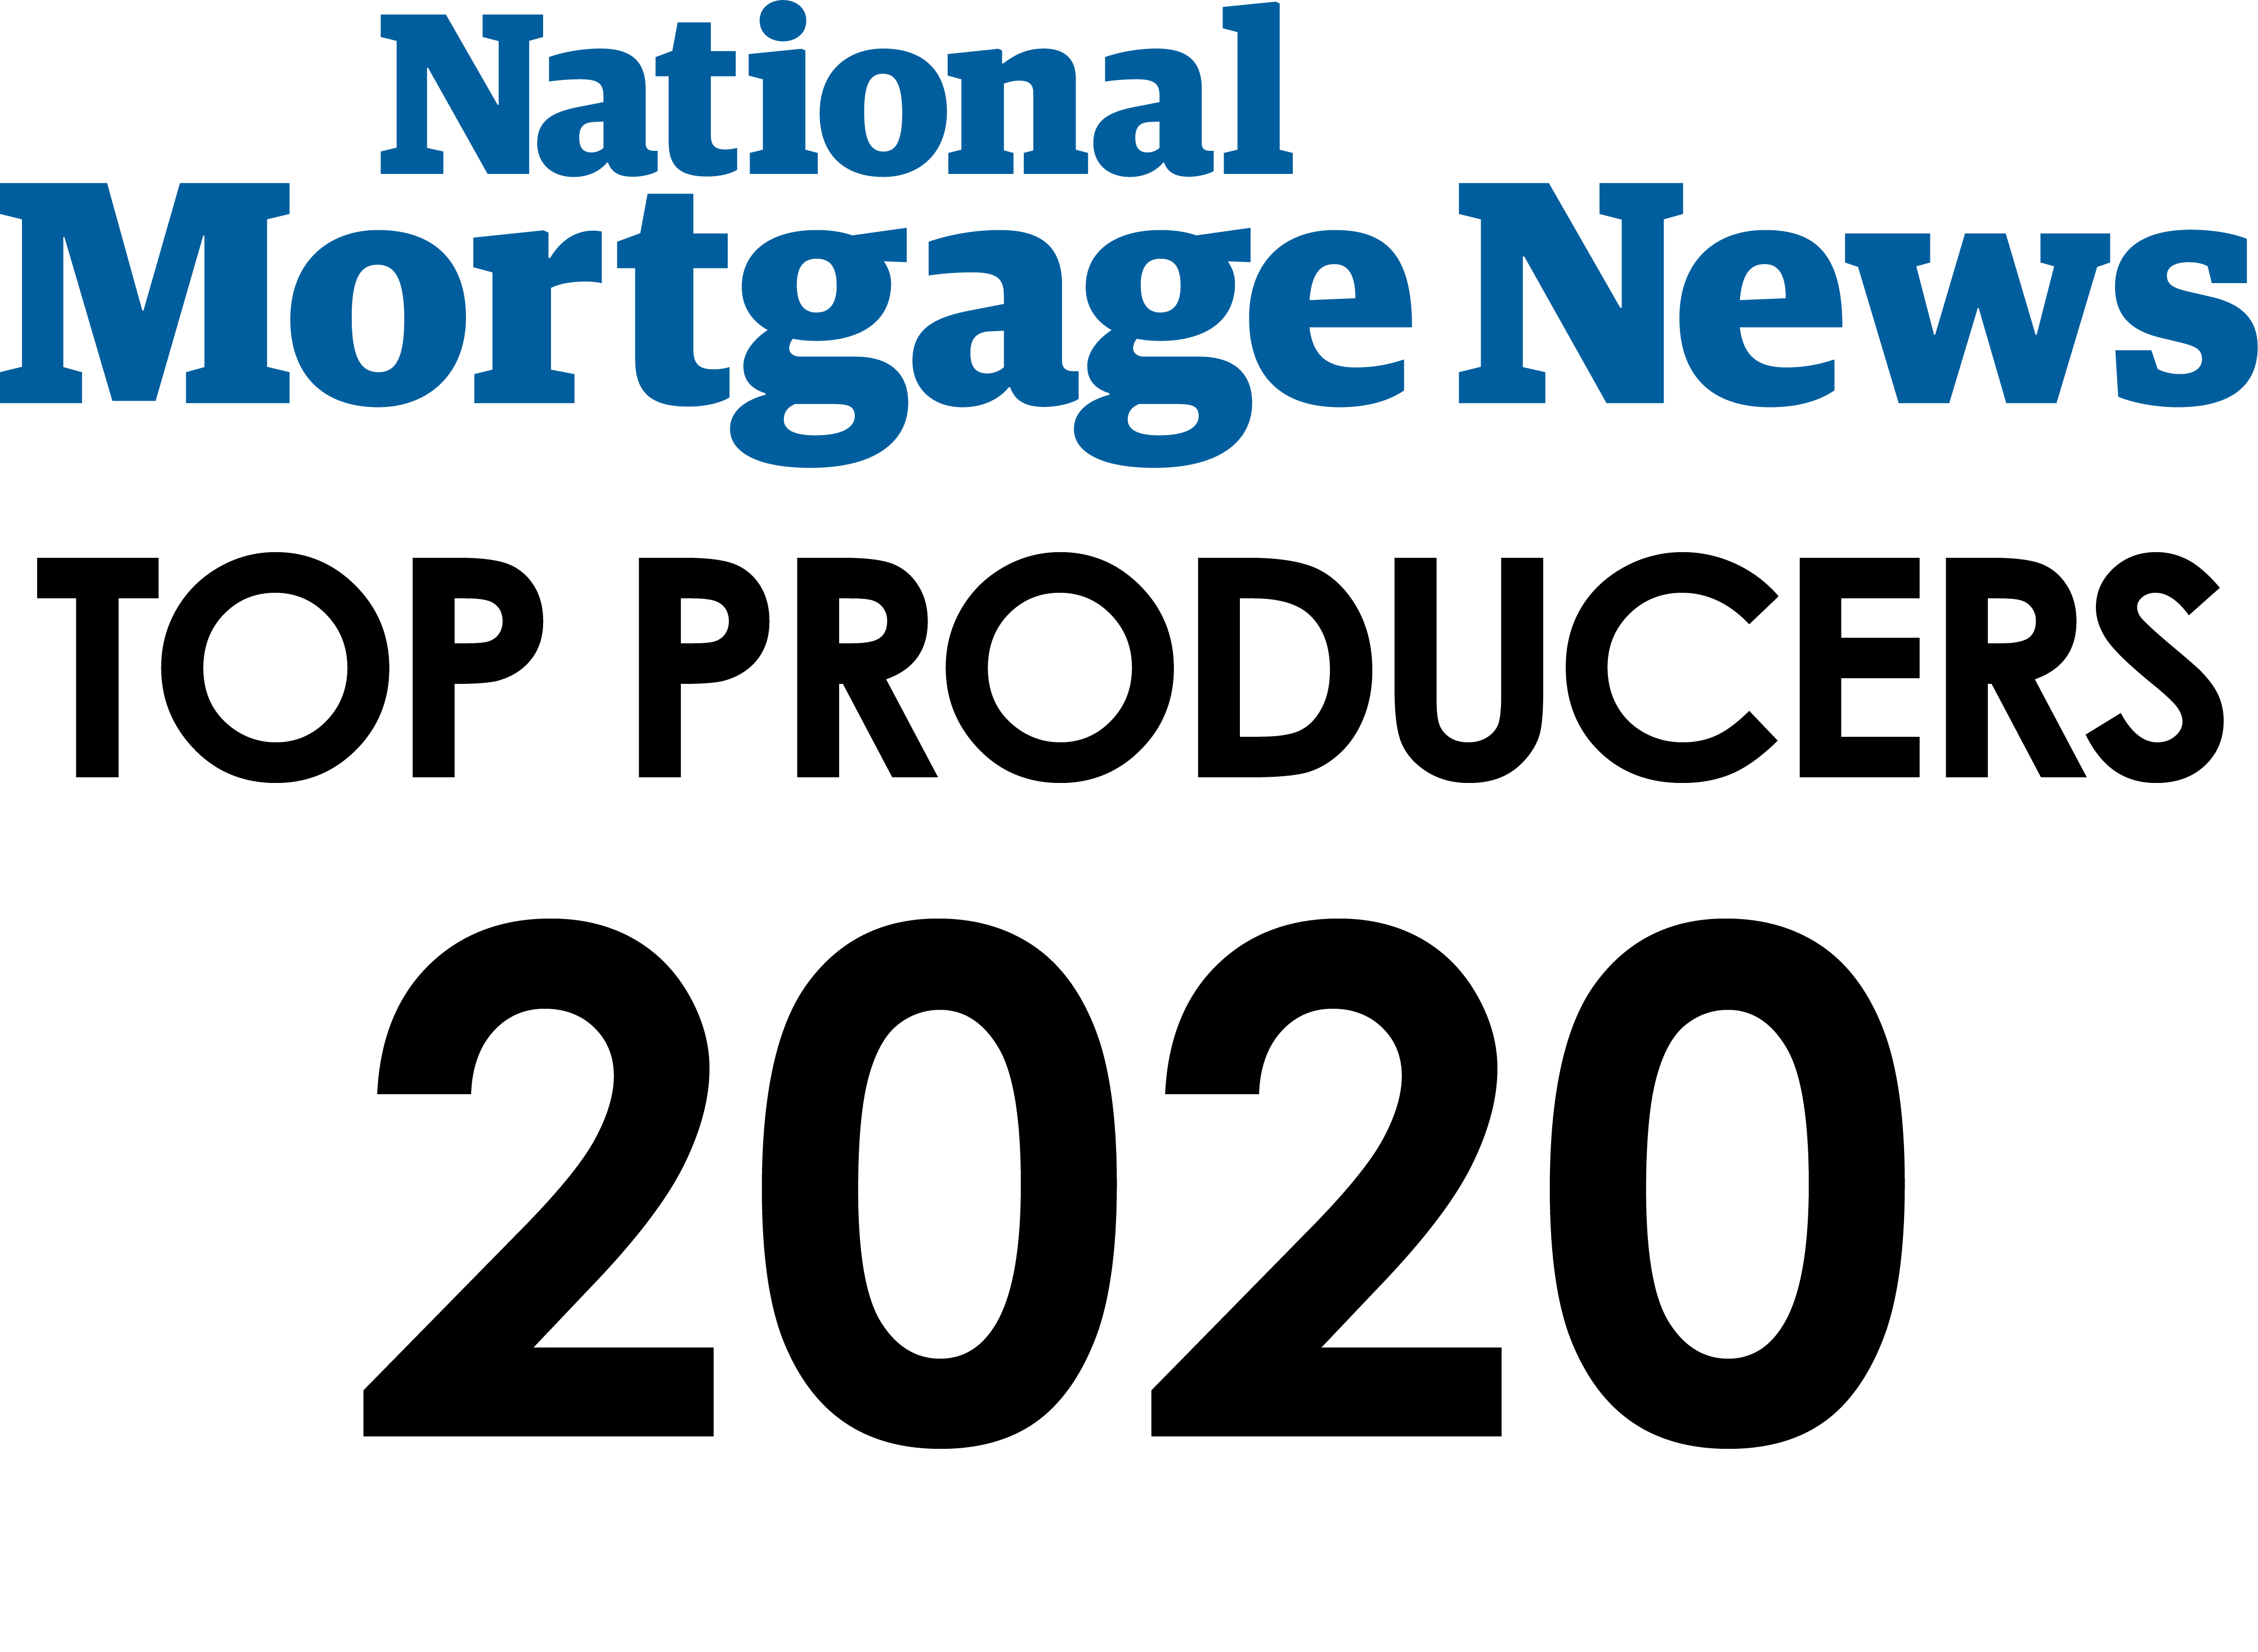 National Mortgage News Releases 201300 of Their 2020 Top Producers List